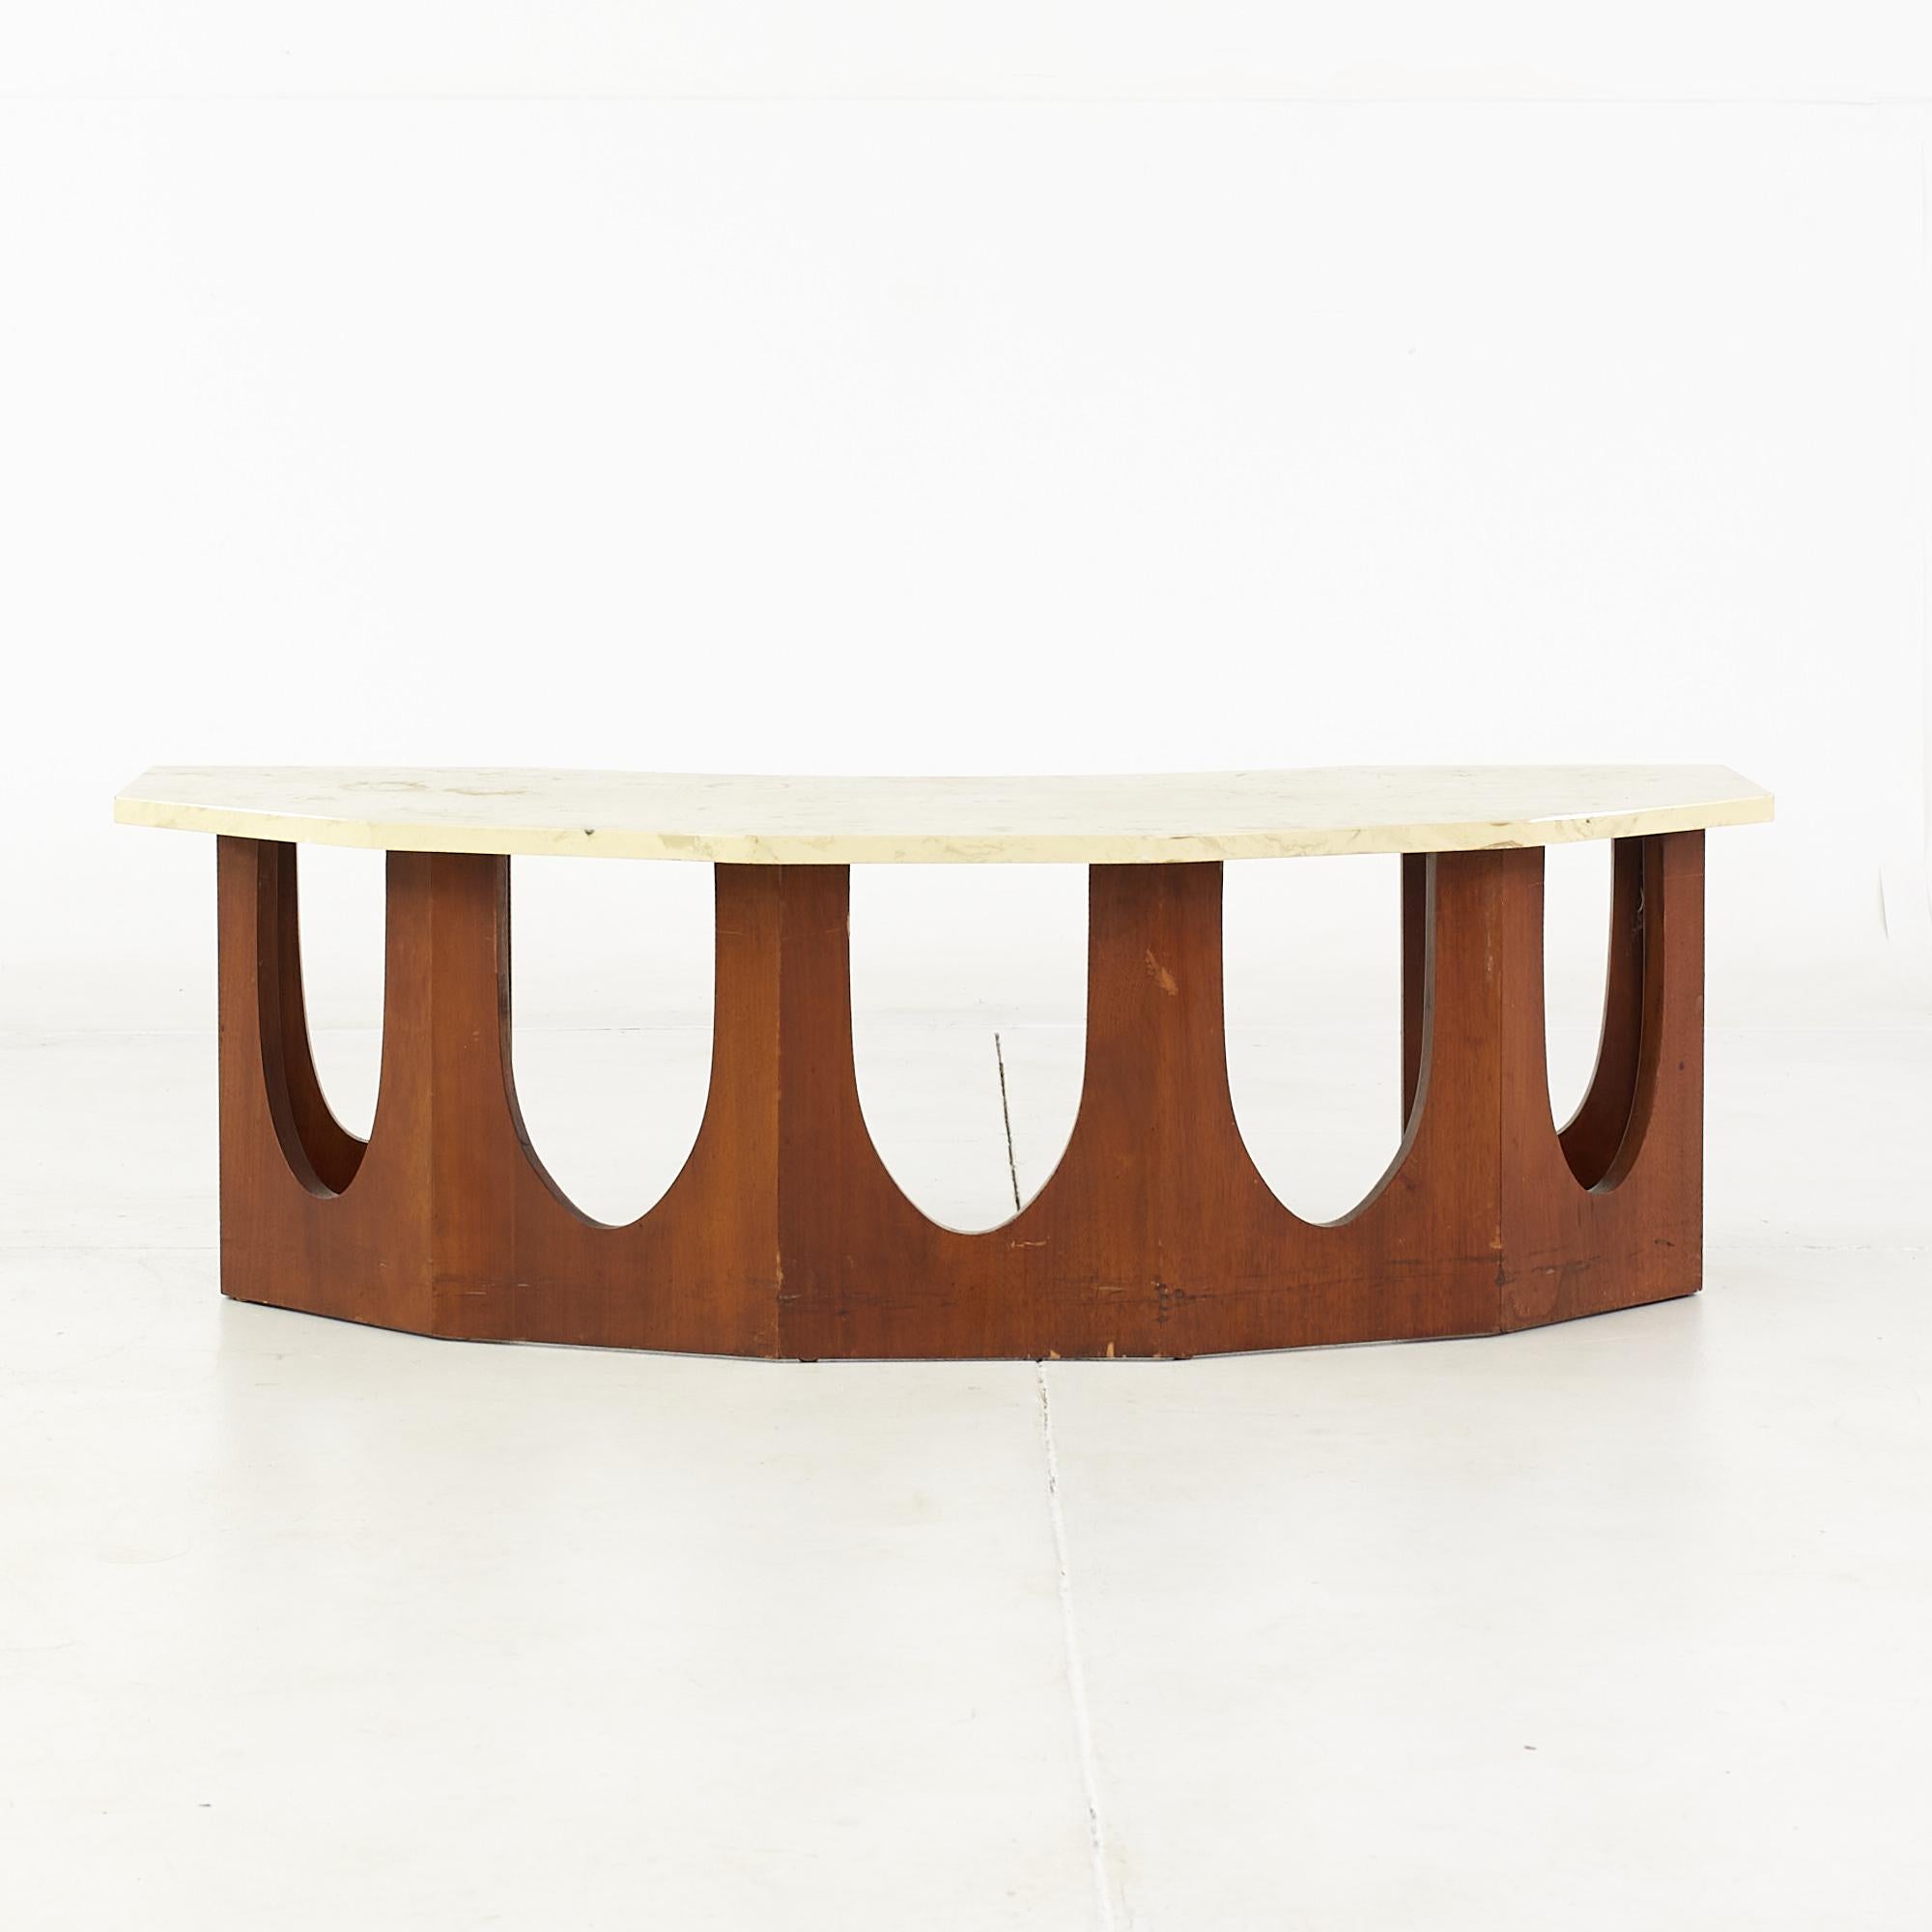 Harvey Probber mid century walnut and Travertine half crescent moon coffee table

This coffee table measures: 47.5 wide x 22 deep x 15 inches high

All pieces of furniture can be had in what we call restored vintage condition. That means the